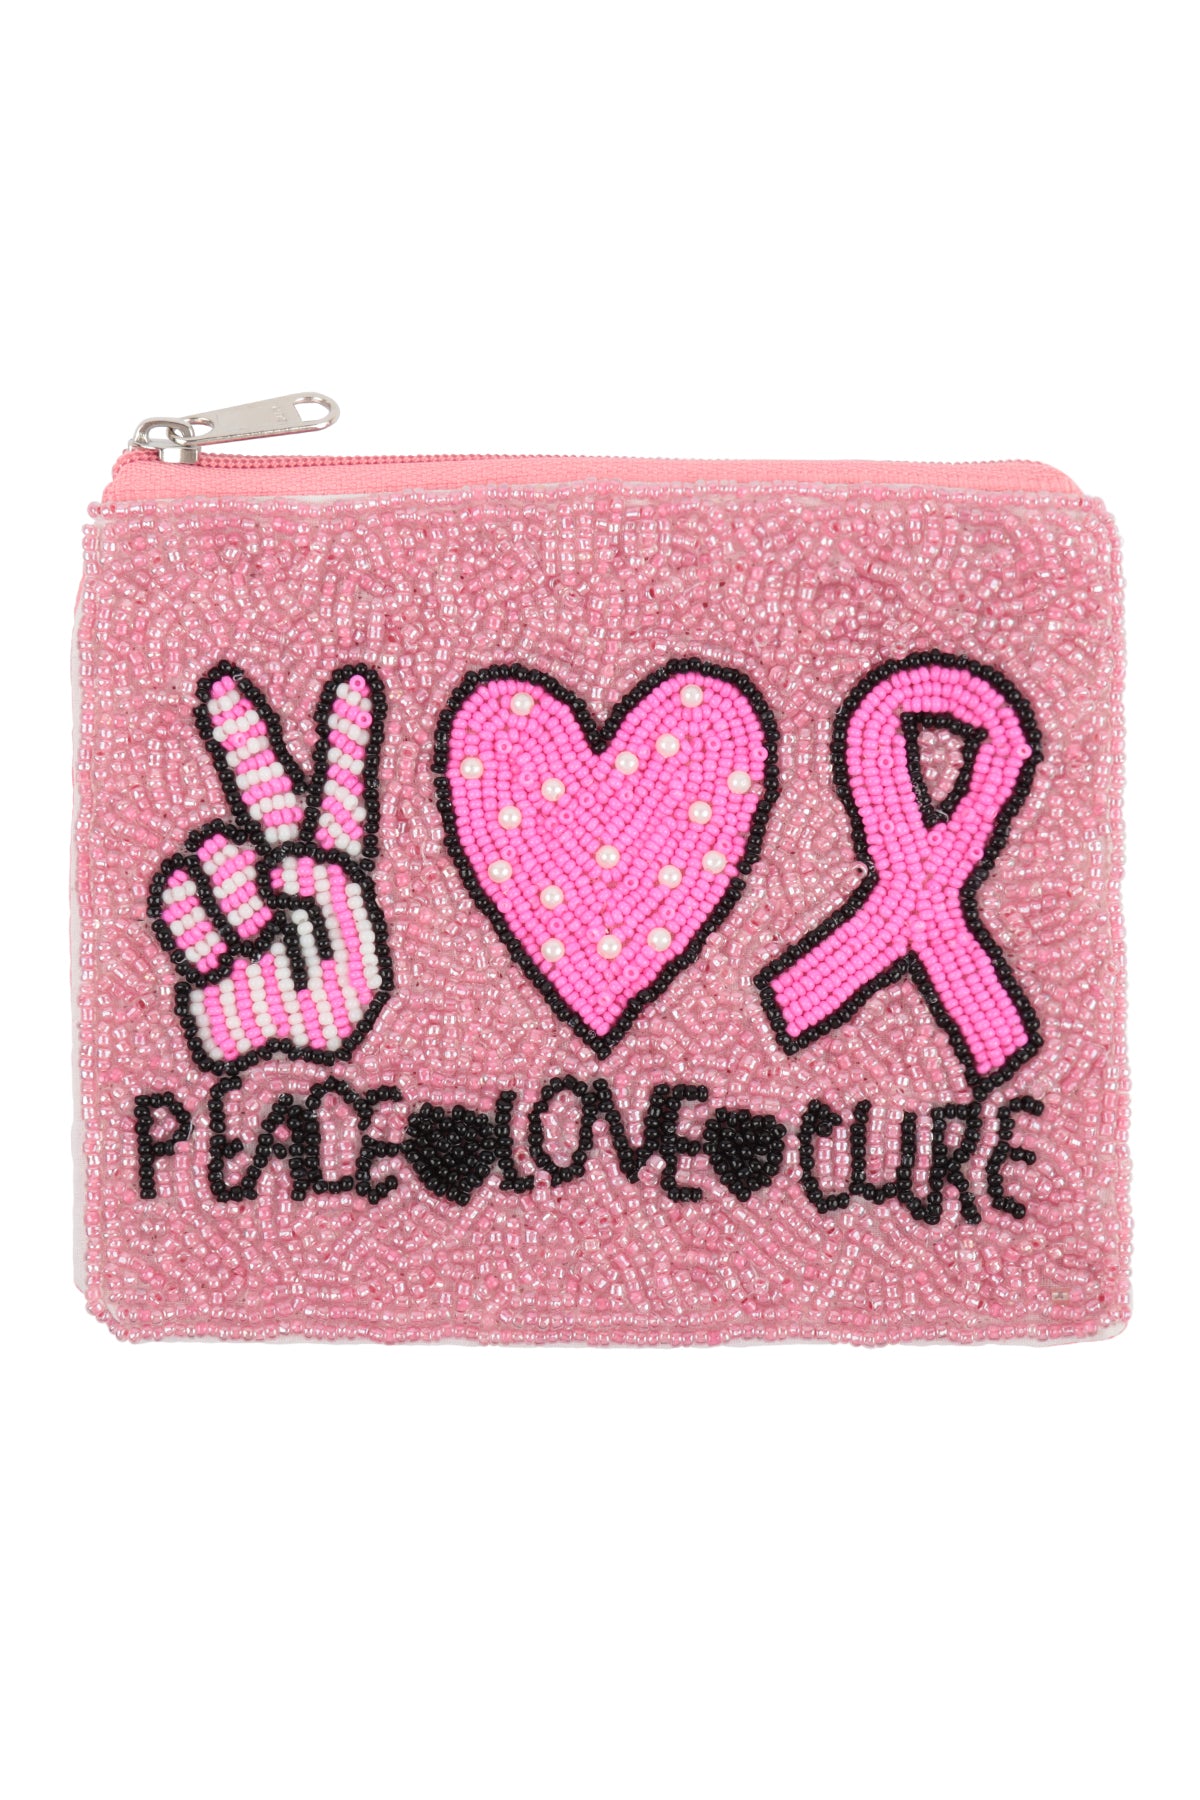 PEACE LOVE CURE PINK RIBBON AWARENESS SEED BEADS COIN POUCH-PINK